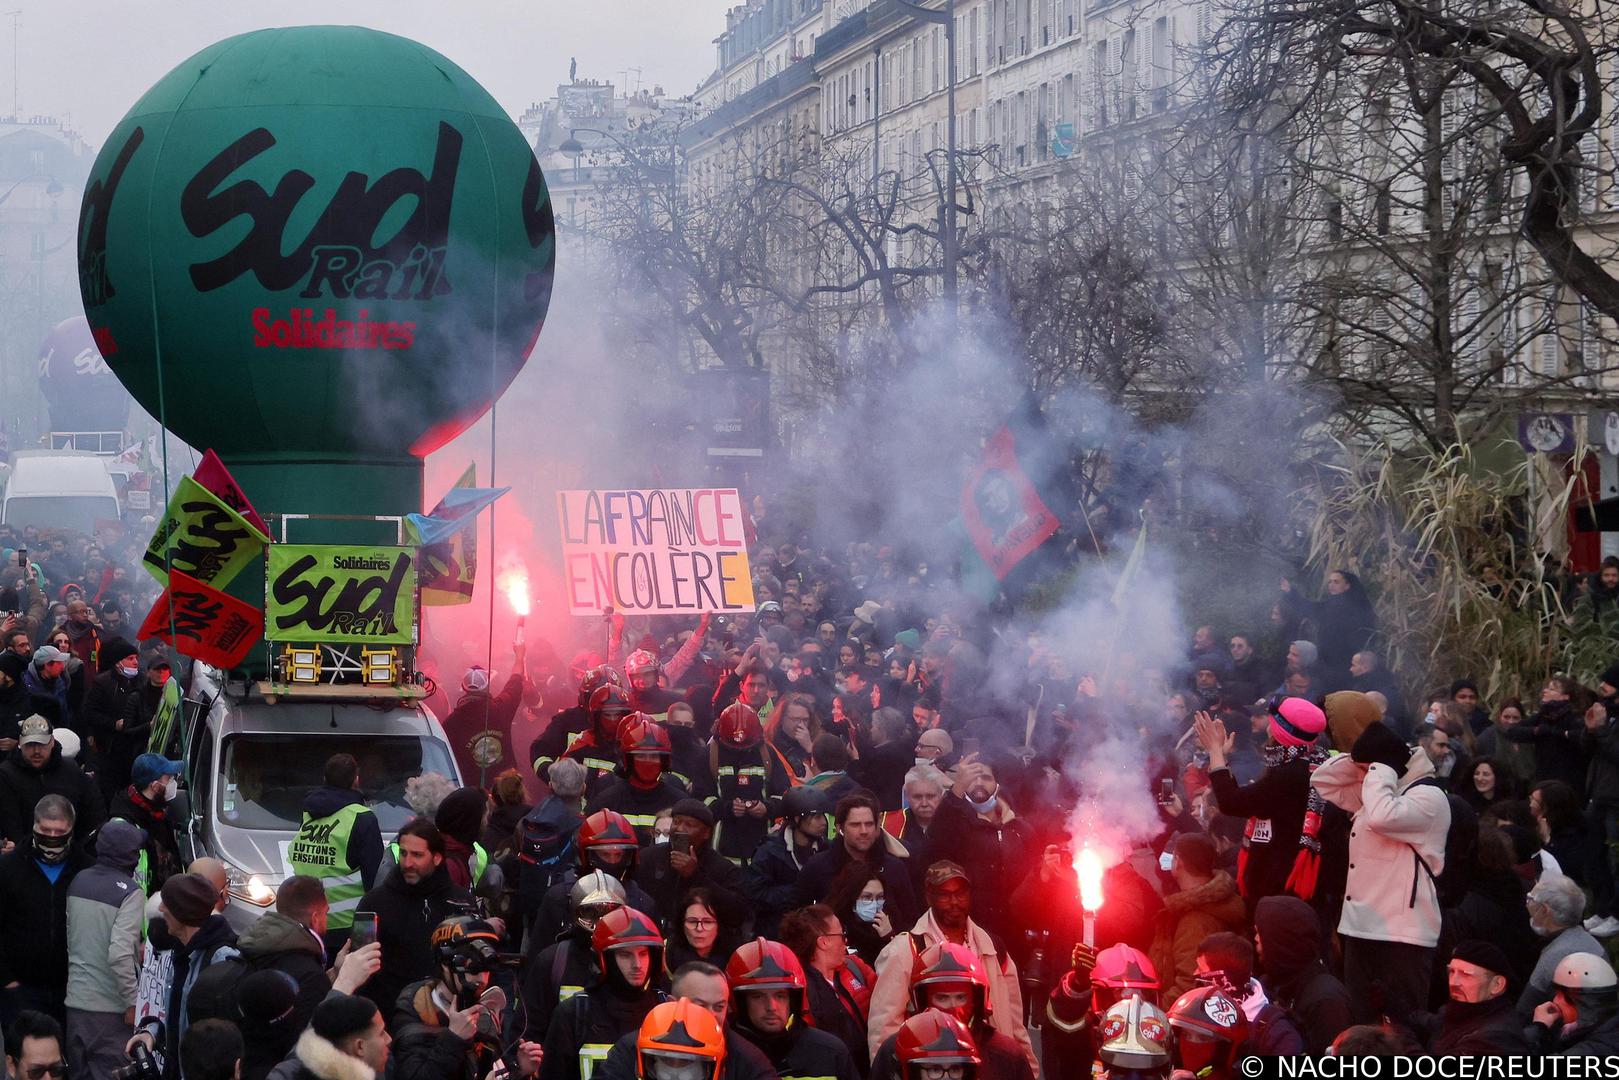 French firefighters on strike and protesters walk past the balloon of Sud Rail Solidaires labour union a demonstration as part of the tenth day of nationwide strikes and protests against French government's pension reform in Paris, France, March 28, 2023.   REUTERS/Nacho Doce Photo: NACHO DOCE/REUTERS